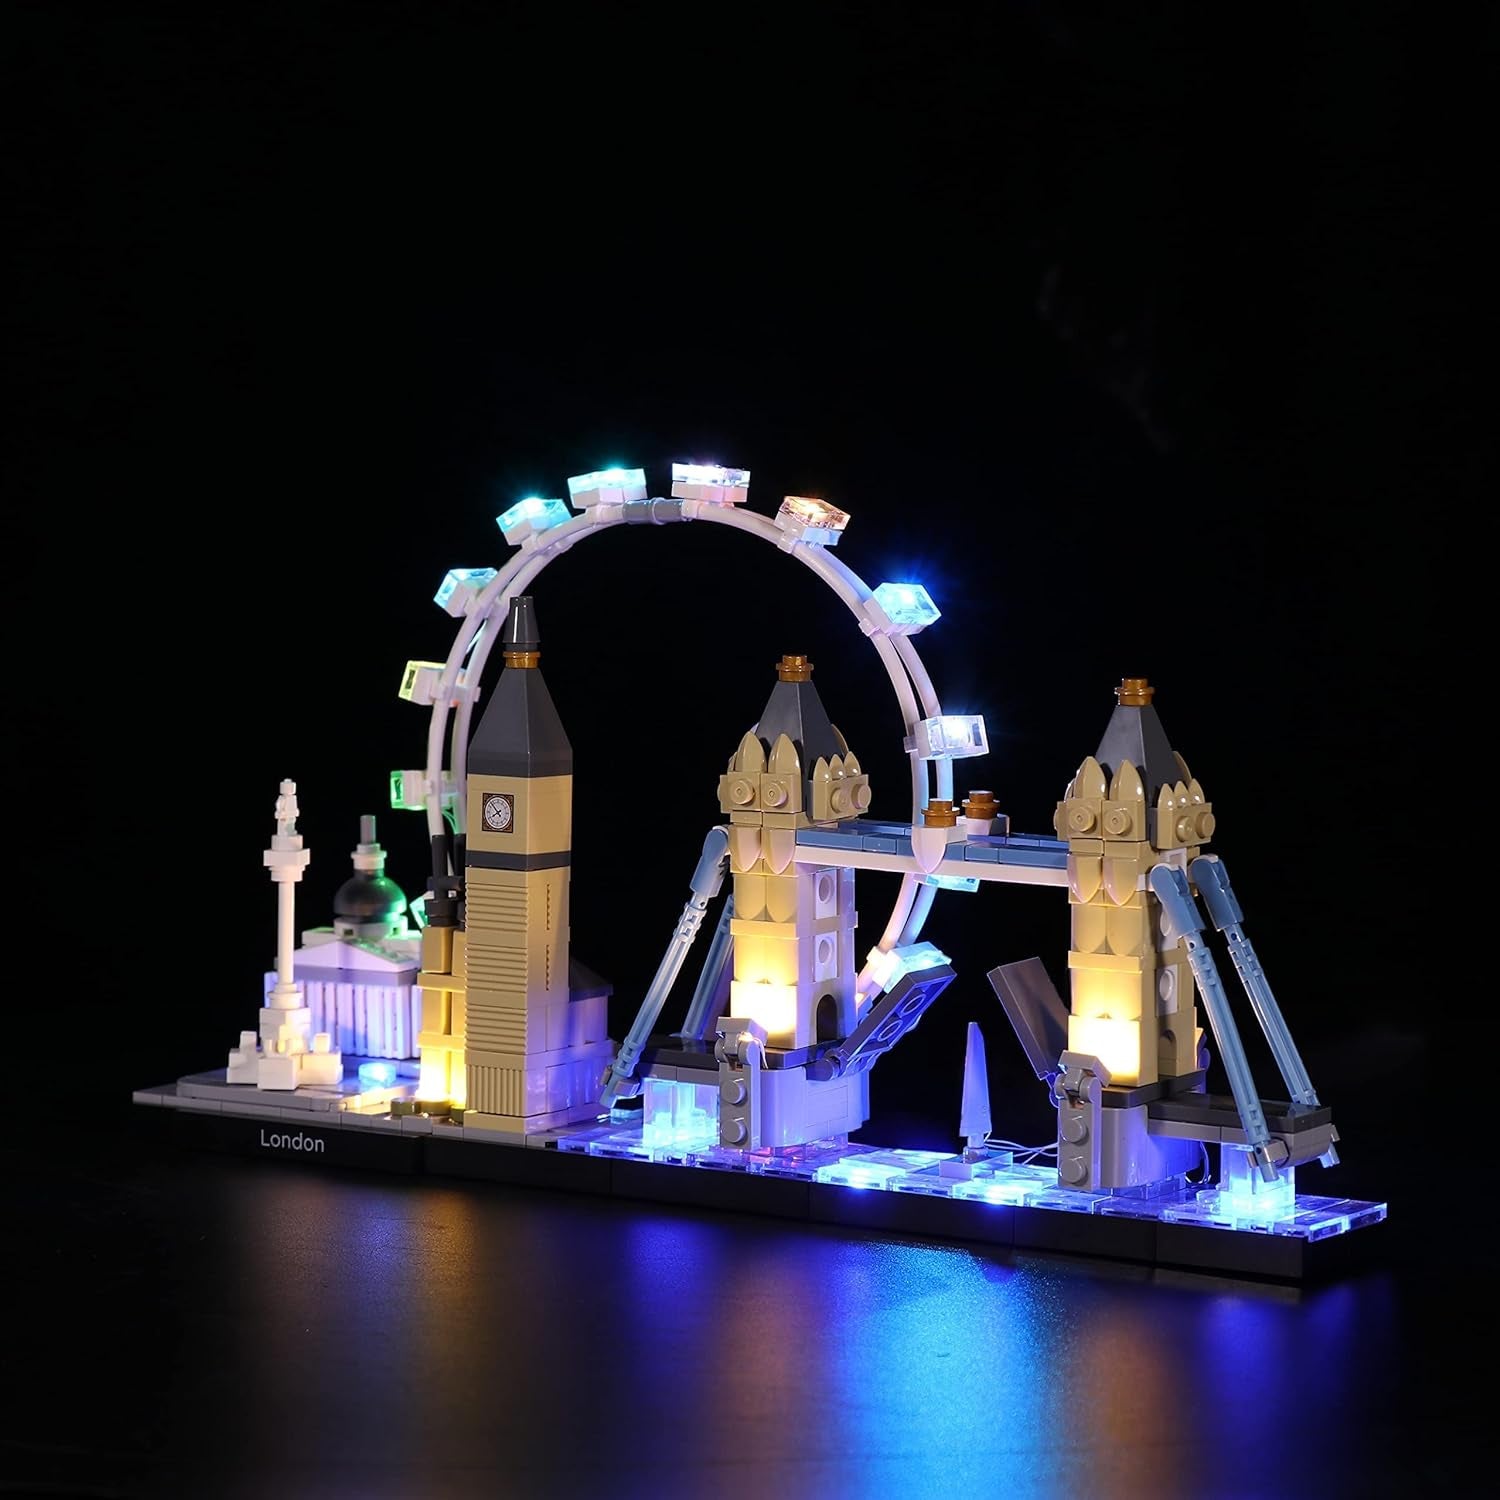 LED Lighting Kit for Lego Architecture London Skyline, Light Set Compatible with Lego 21034, without Lego Model, Lights Only